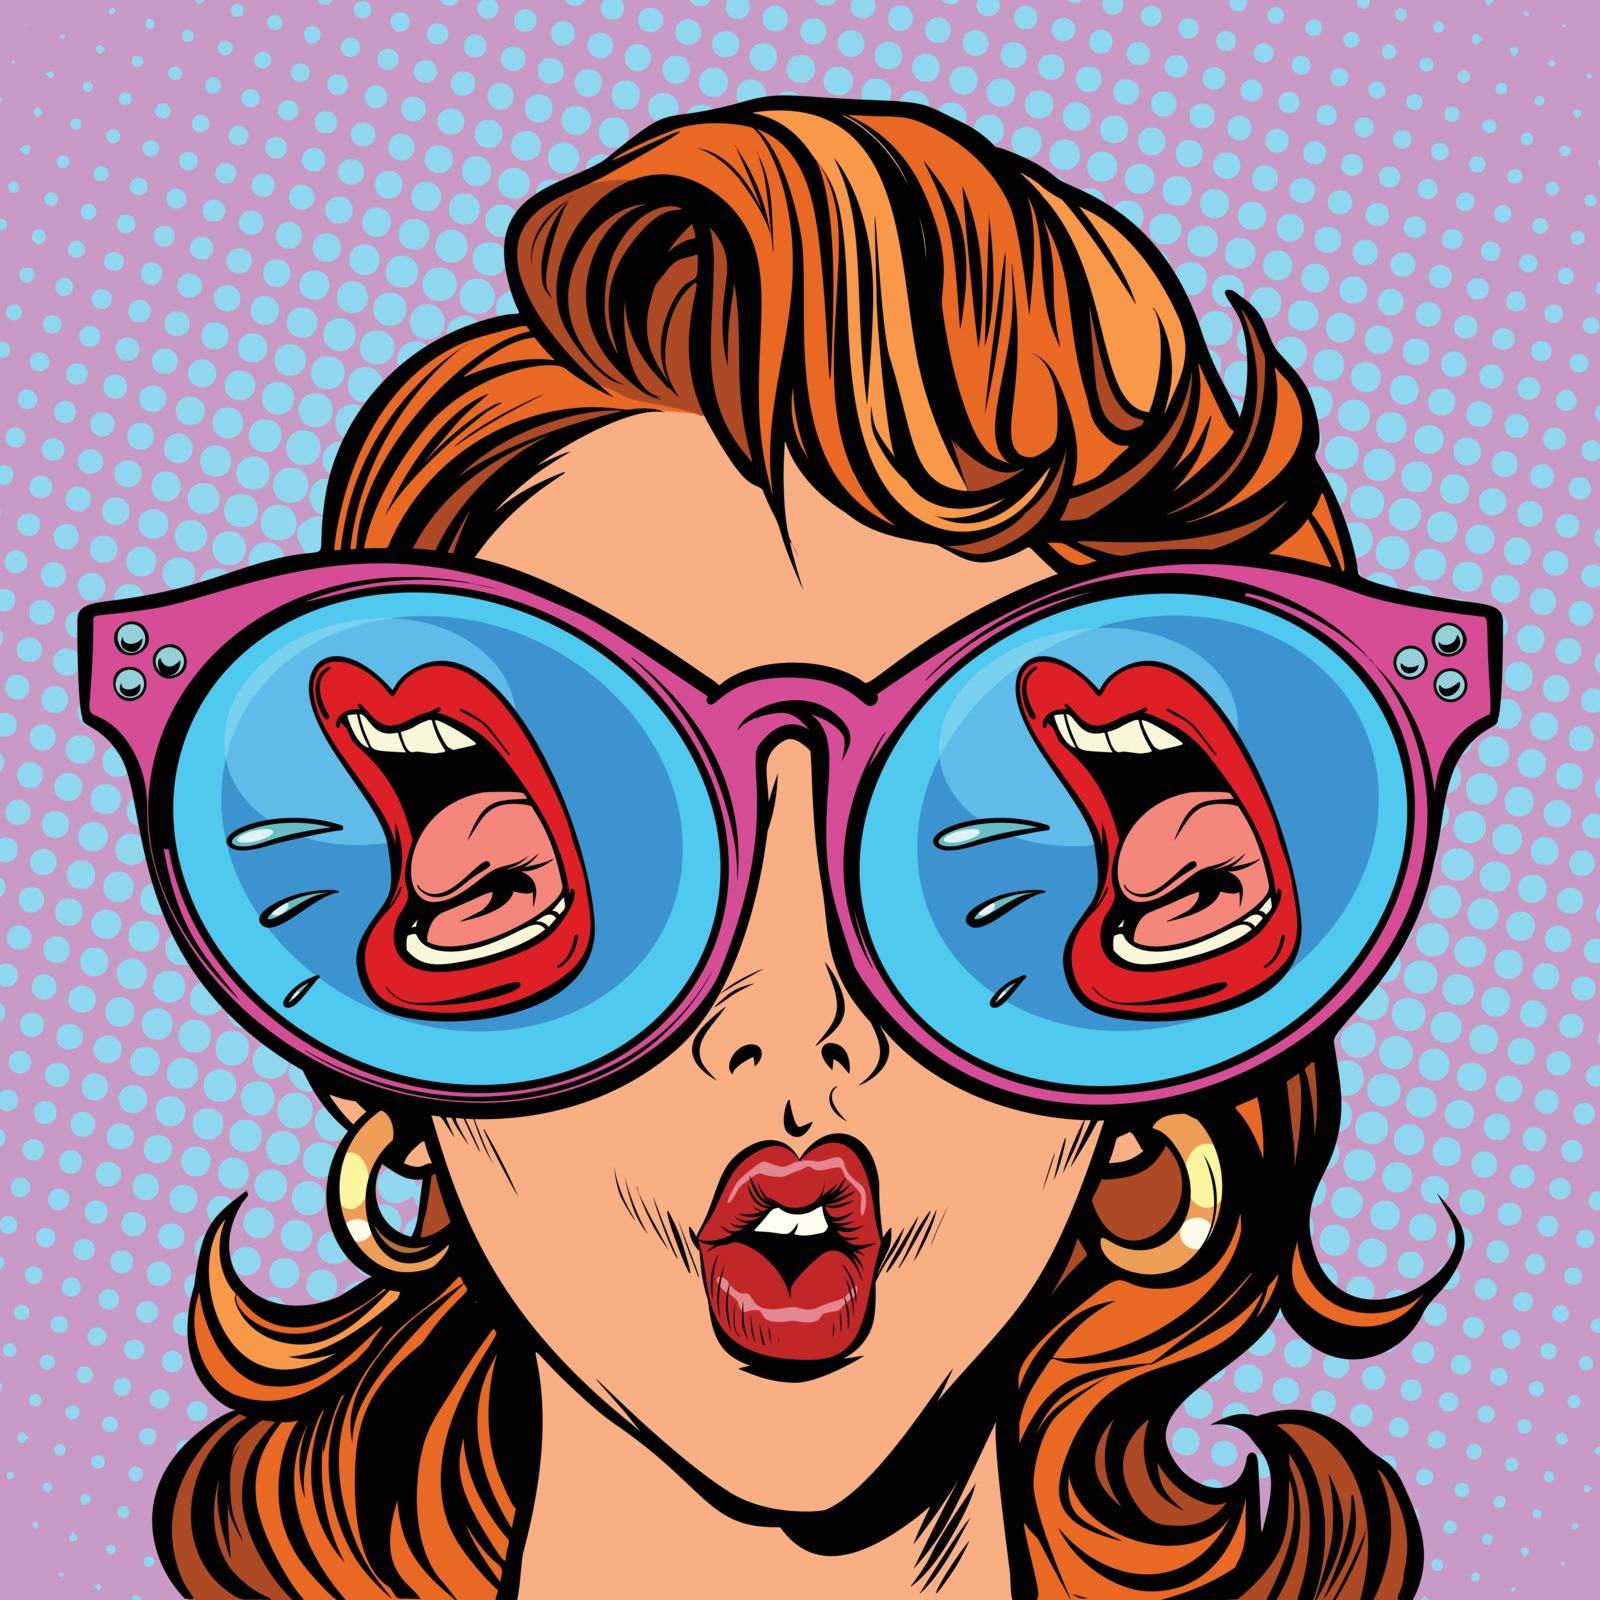 Woman with sunglasses. screaming mouth in the reflection. Comic cartoon pop art retro illustration vector kitsch drawing